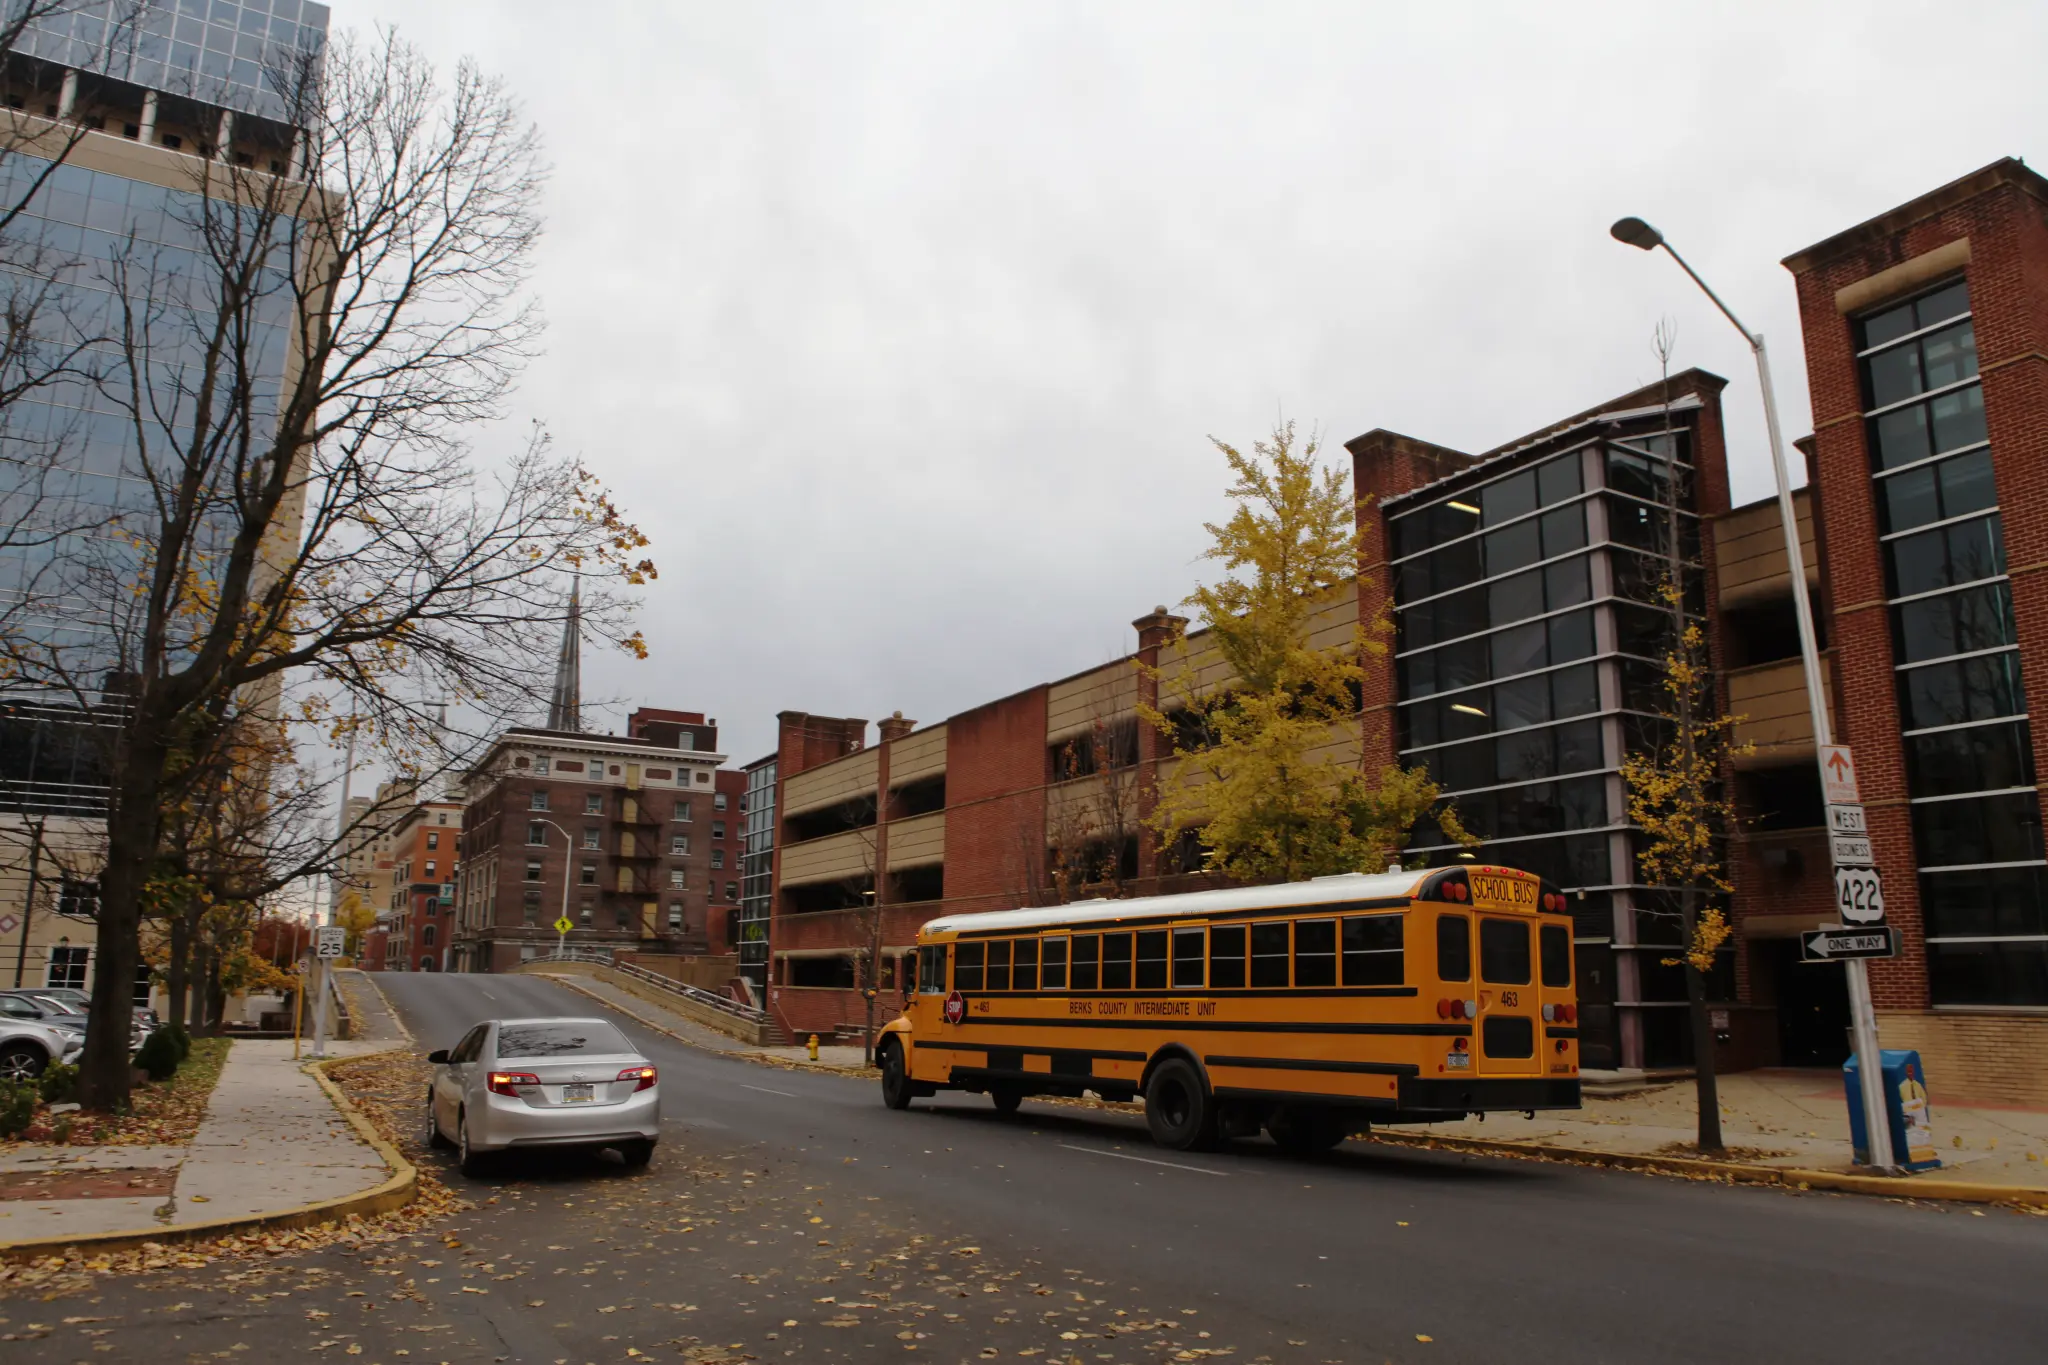 A Berks County Intermediate Unit school bus driving through downtown Reading on a rainy fall day